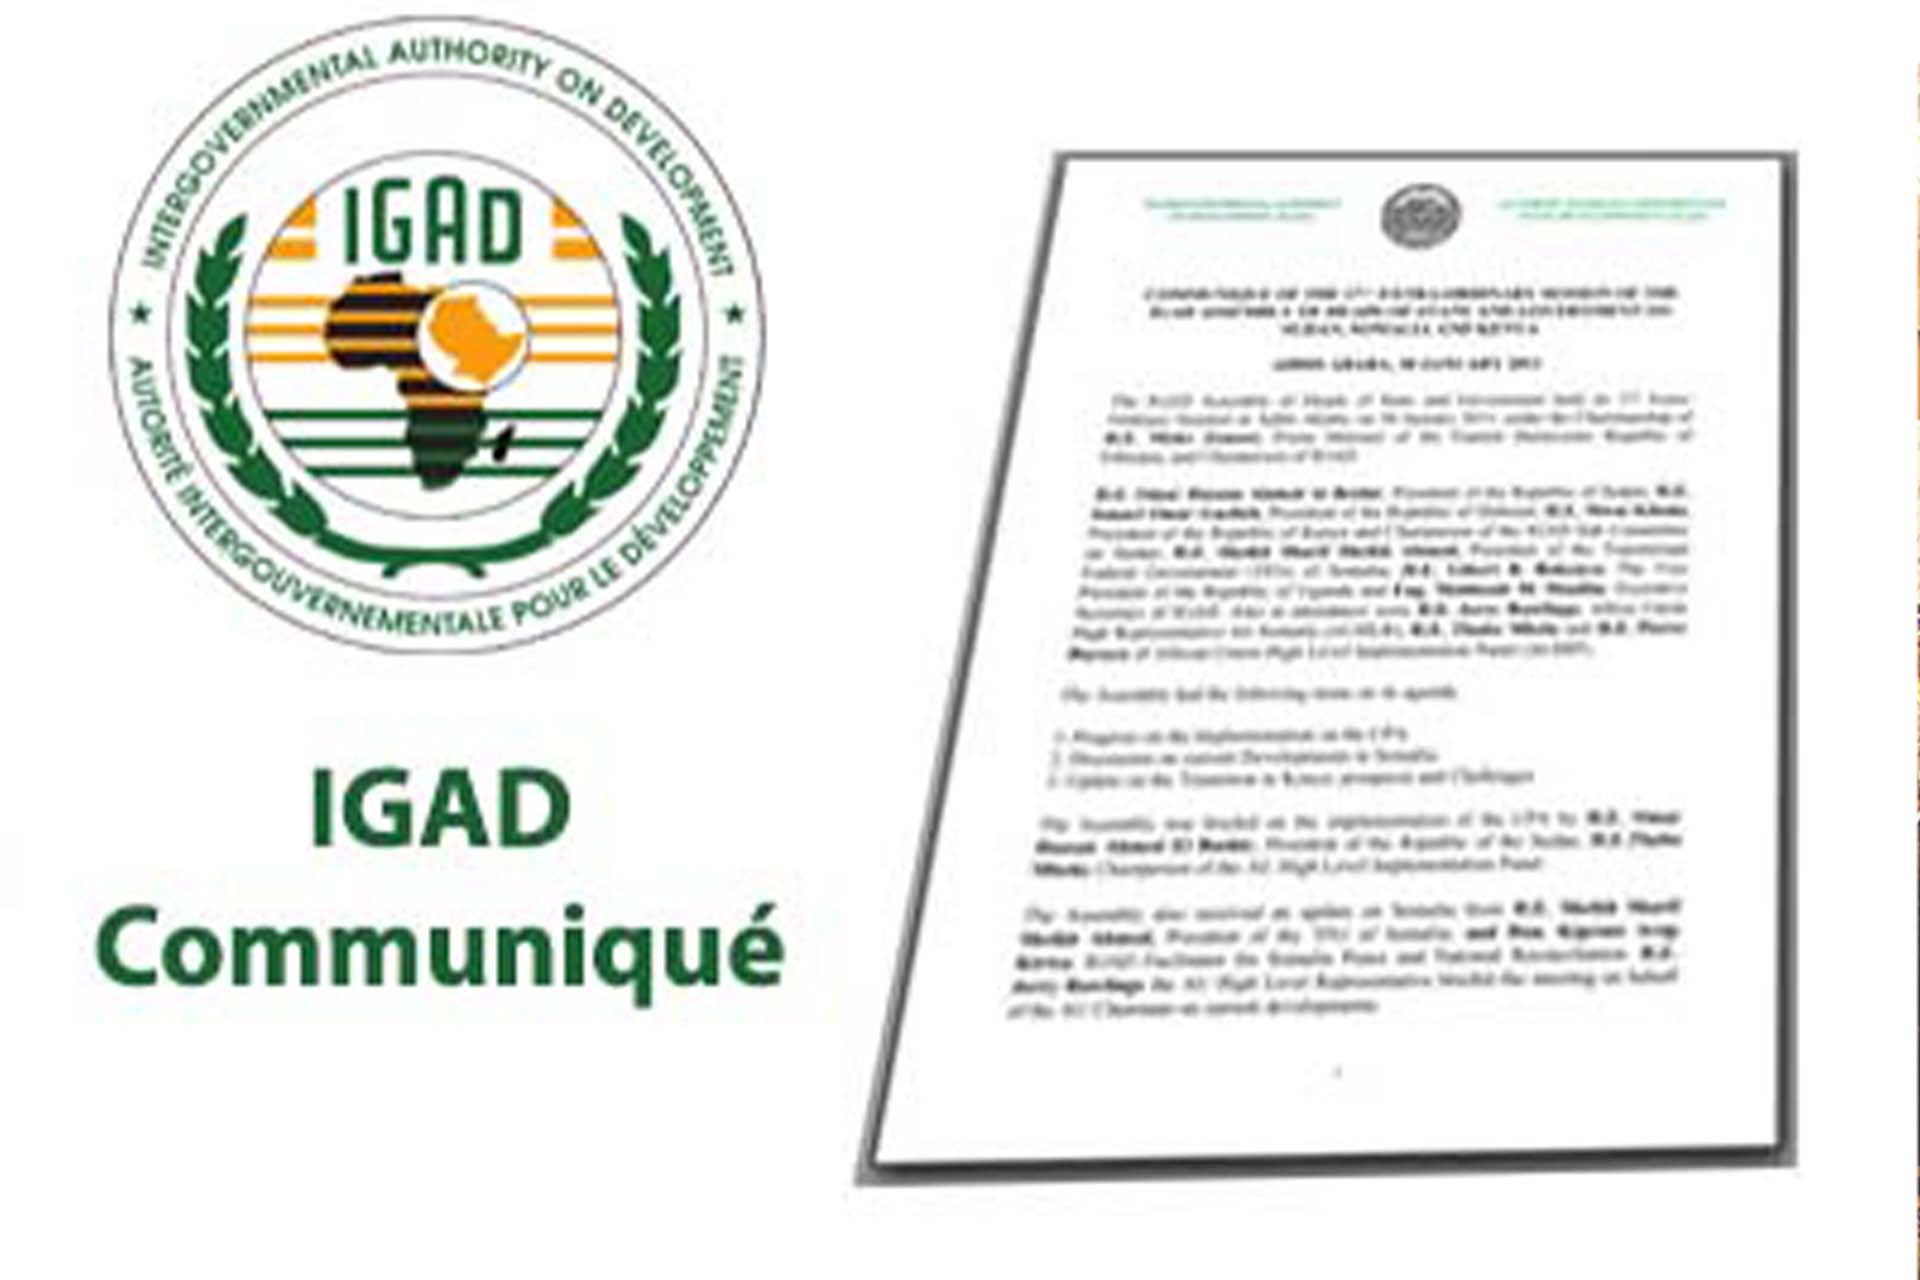 COMMUNIQUE OF 40th EXTRA-ORDINARY IGAD SESSION OF THE IGAD COUNCIL OF MINSITERS ON THE DROUGHT SITUATION IN THE HORN OF AFRICA AND RECENT POLITICAL DEVELOPMENTS IN SOMALIA